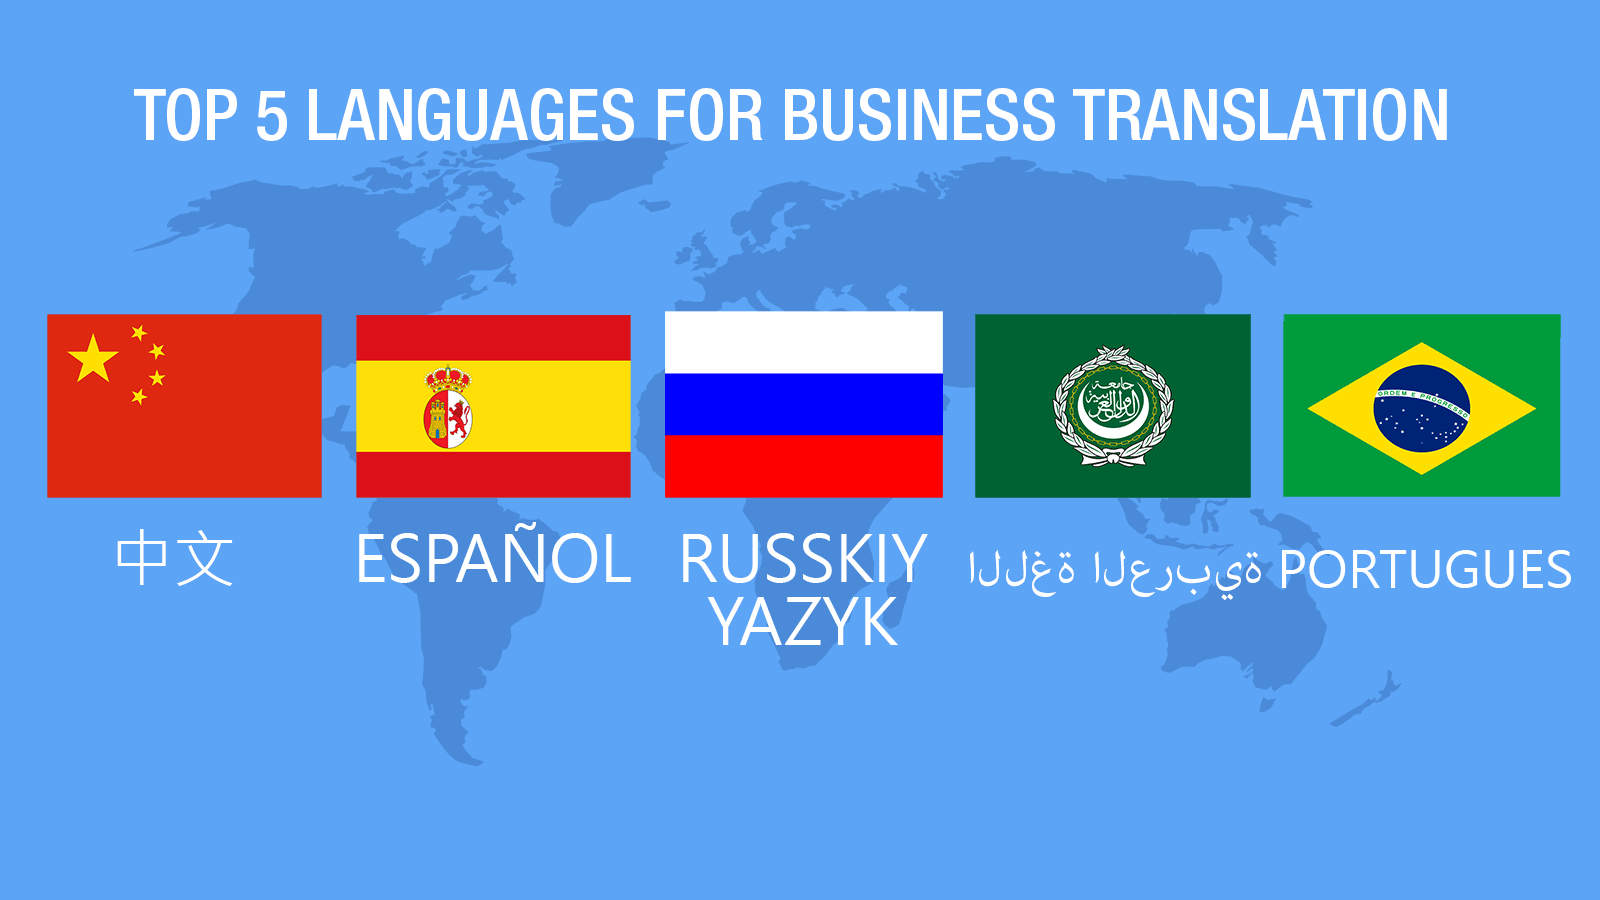 Top 5 Translated Languages for Business